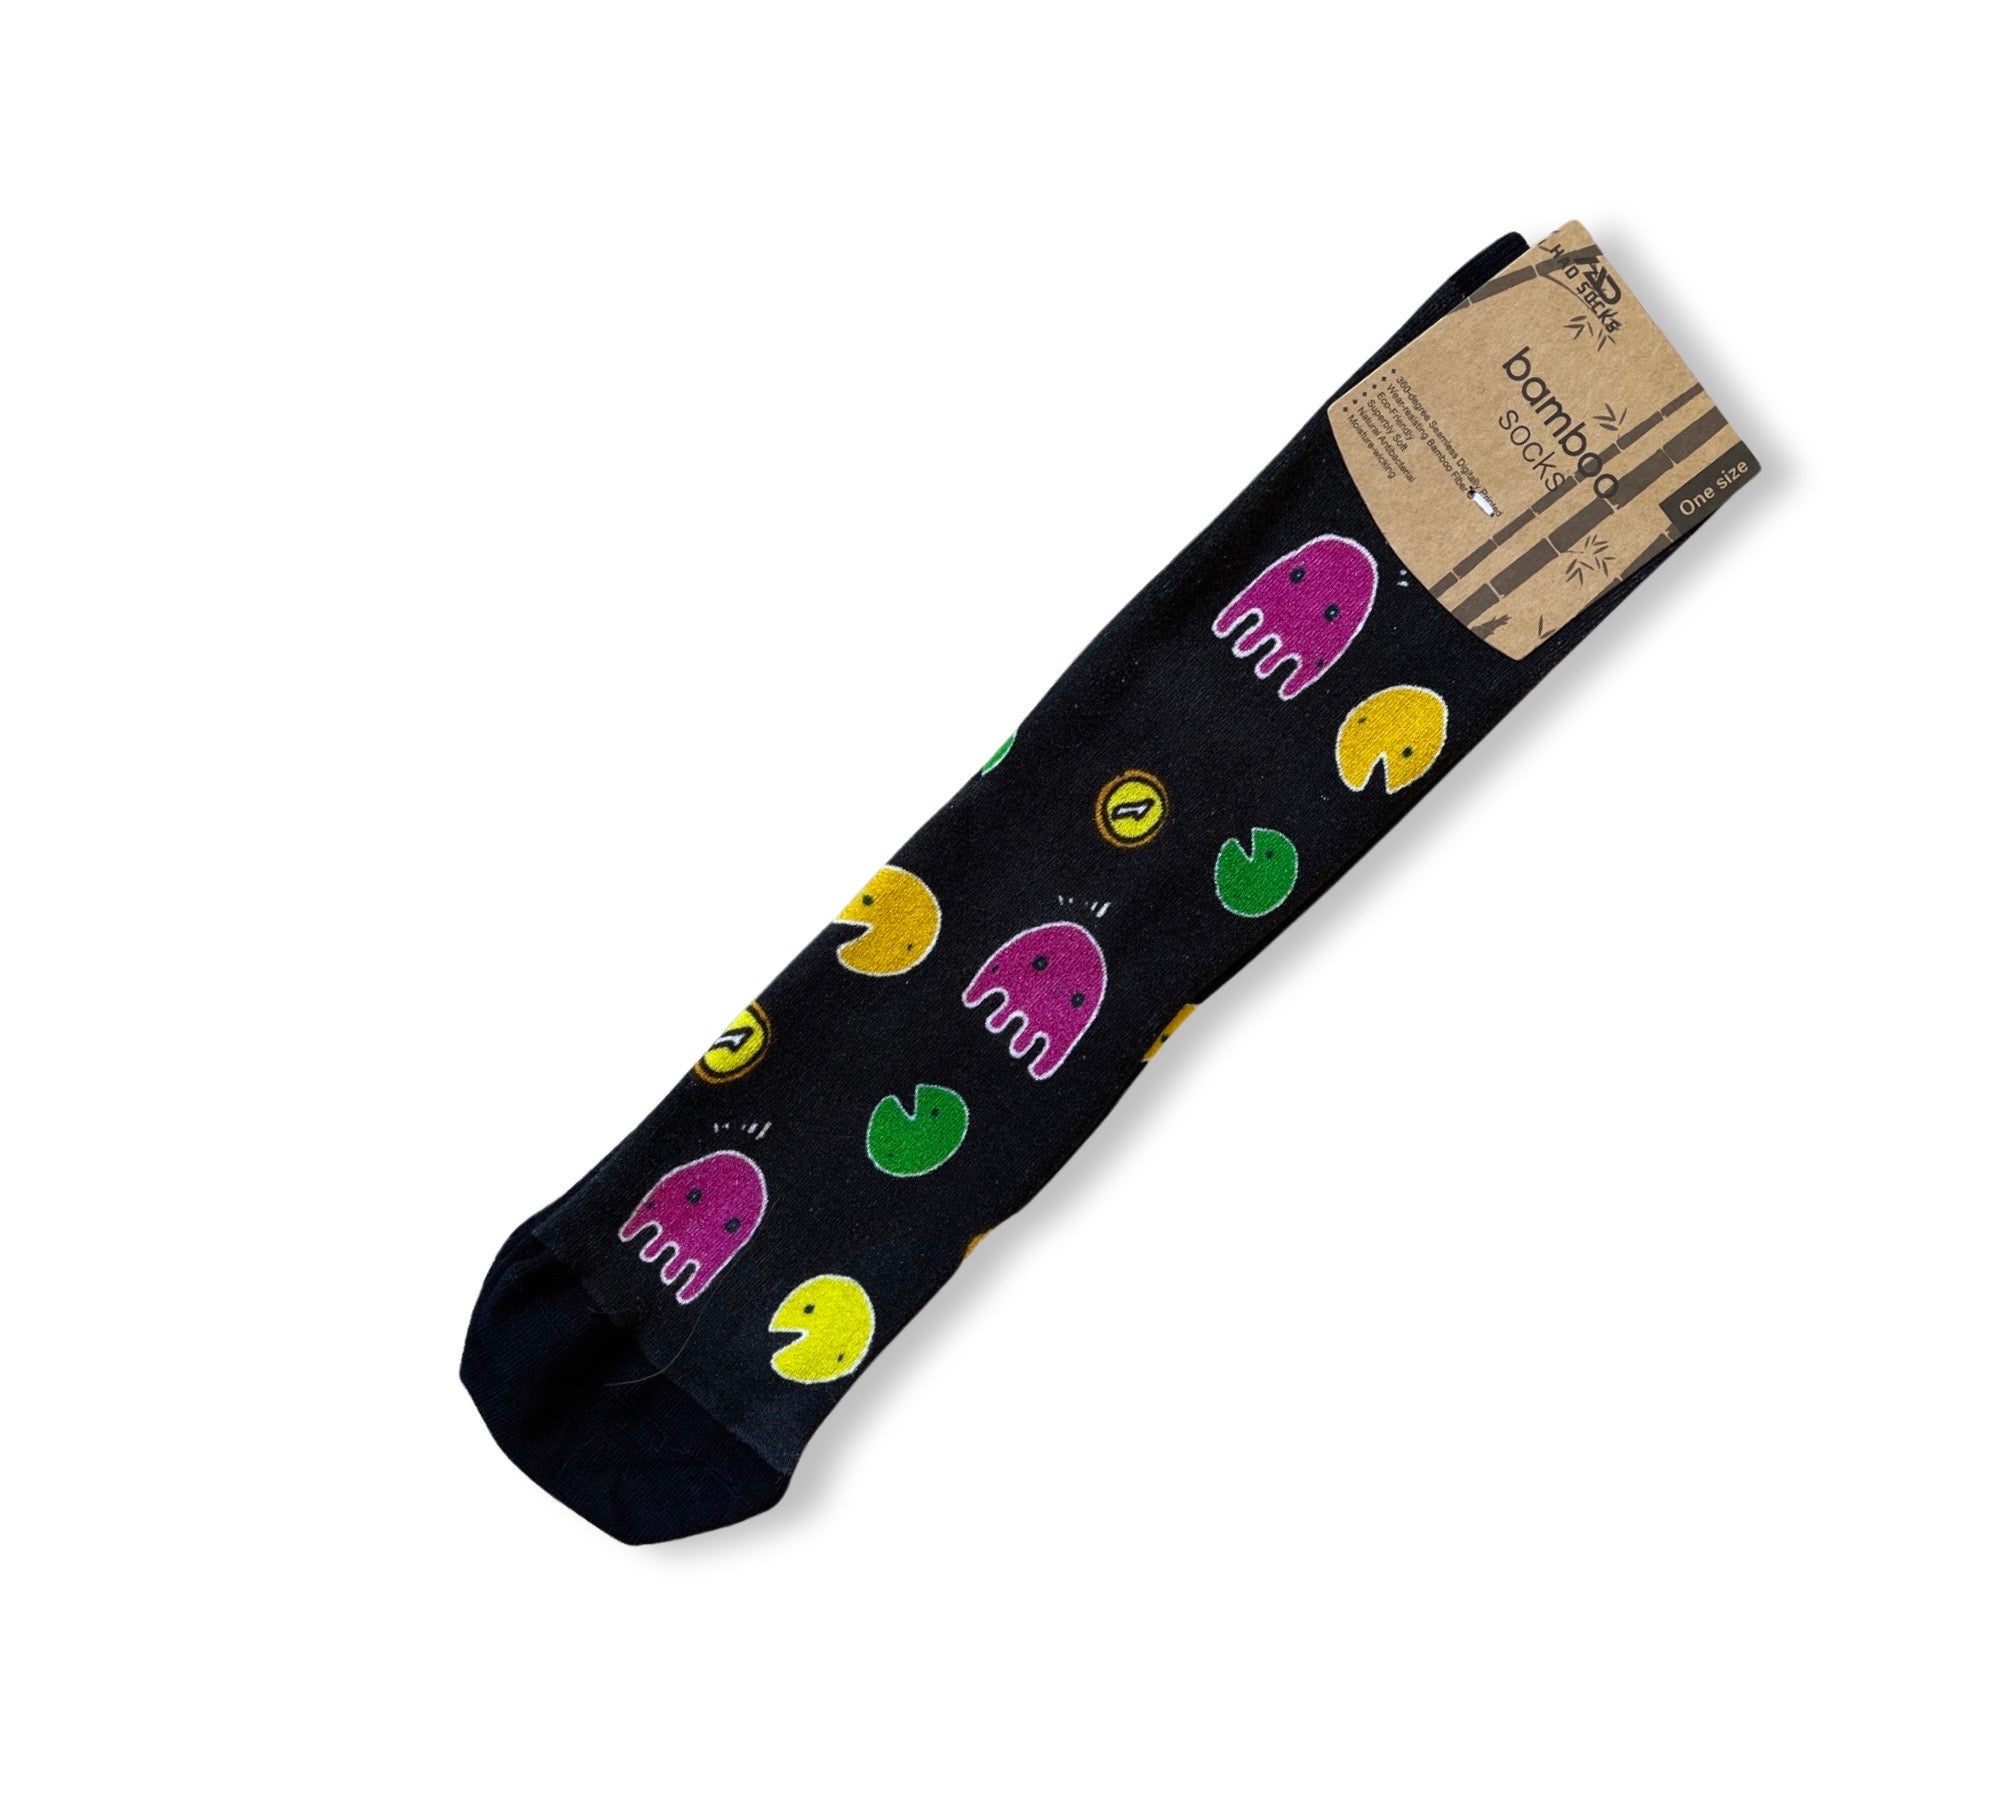 A pair of black socks with colorful, whimsical jellyfish patterns, displayed on a white background with a giftbox co. label at the top.